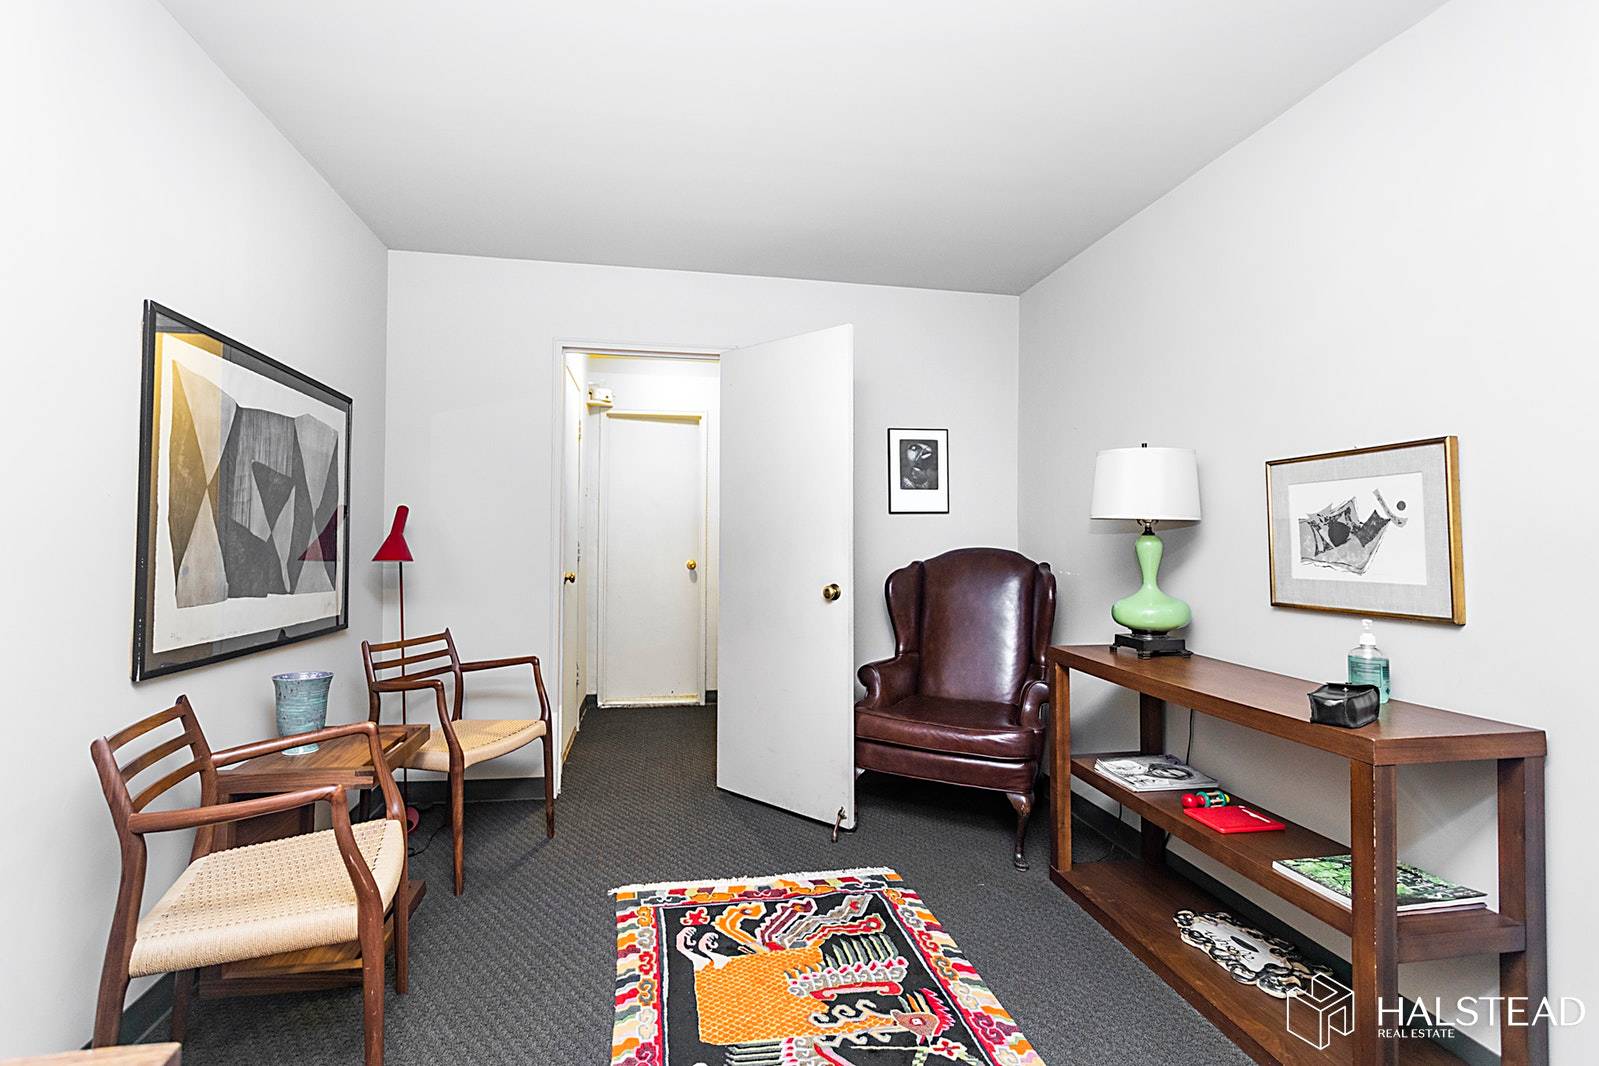 On Park Ave, with beautiful concierge lobby entrance, there is a two room psych office for sale.